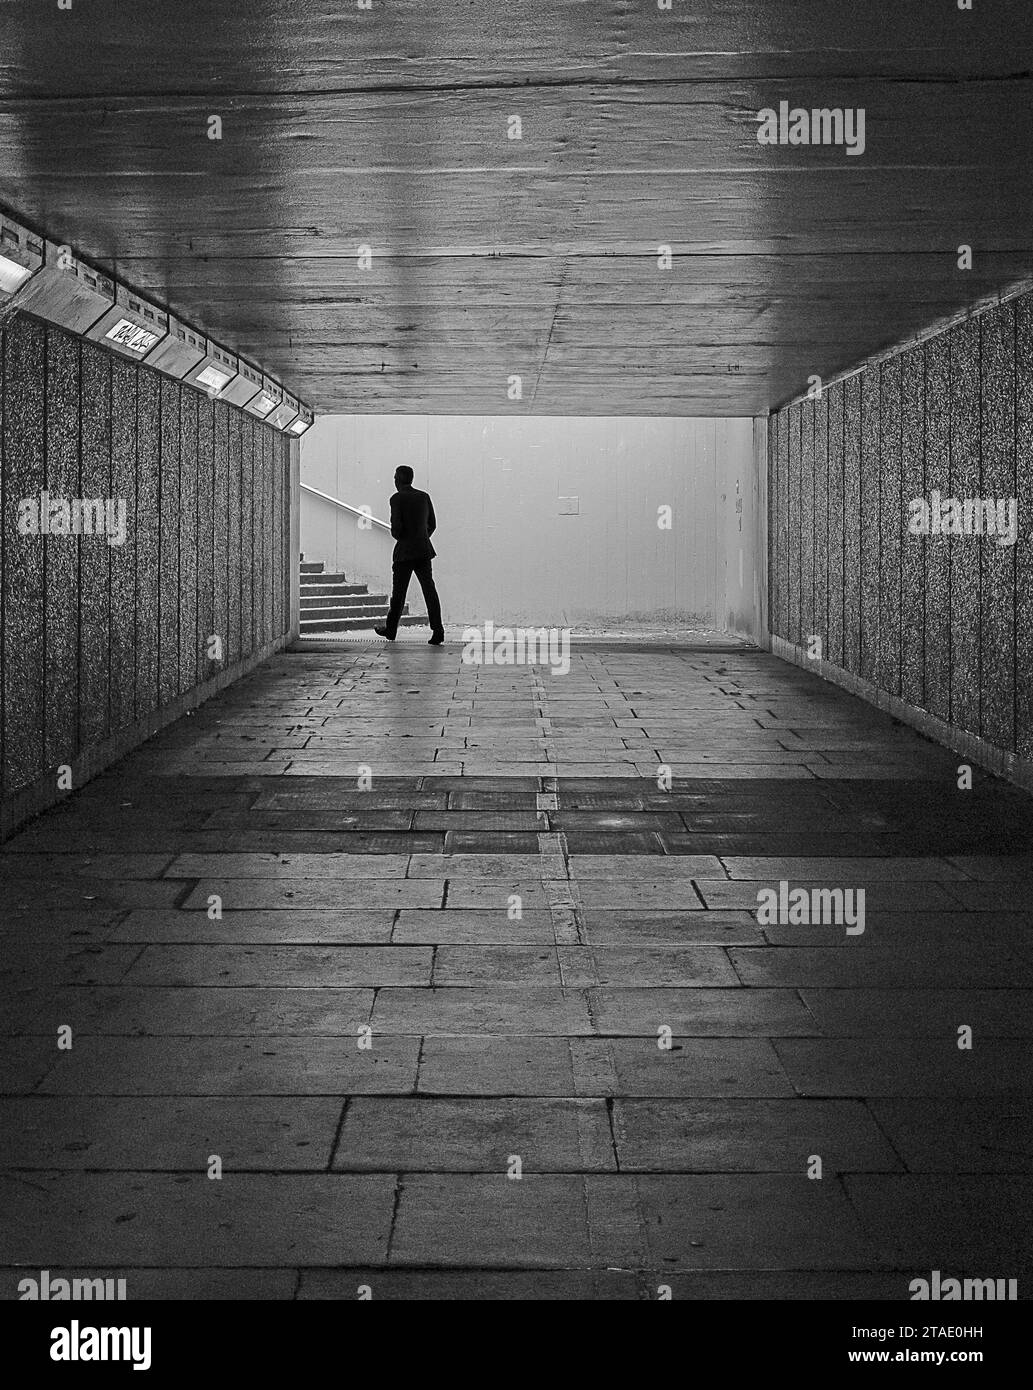 Black and white image of Silhouette of a male person walking in a dark pedestrian underpass towards steps and daylight. Stock Photo